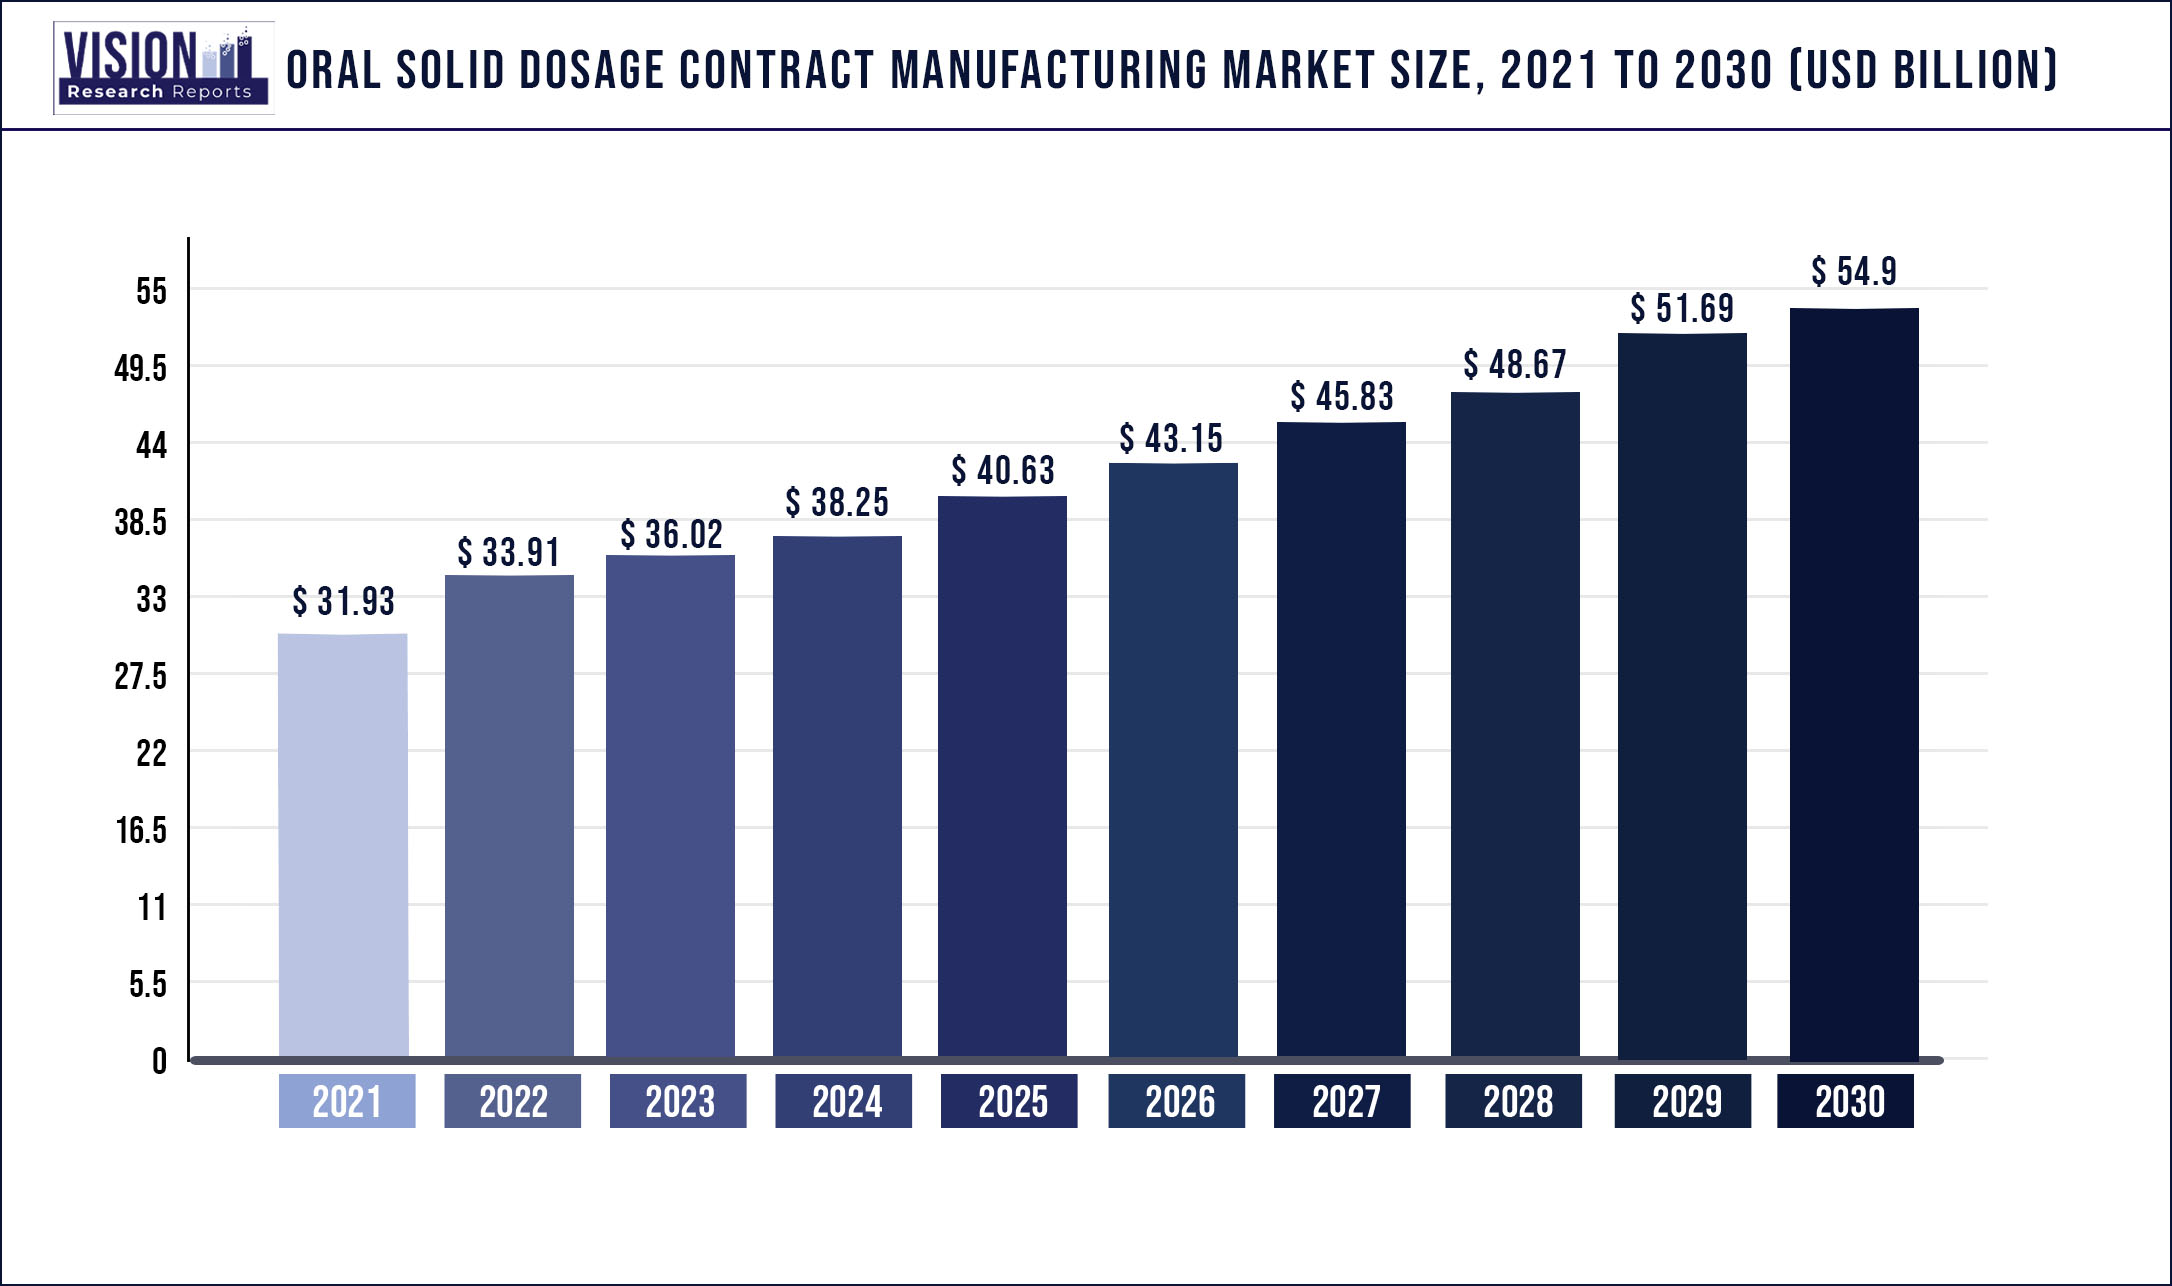 Oral Solid Dosage Contract Manufacturing Market Size 2021 to 2030